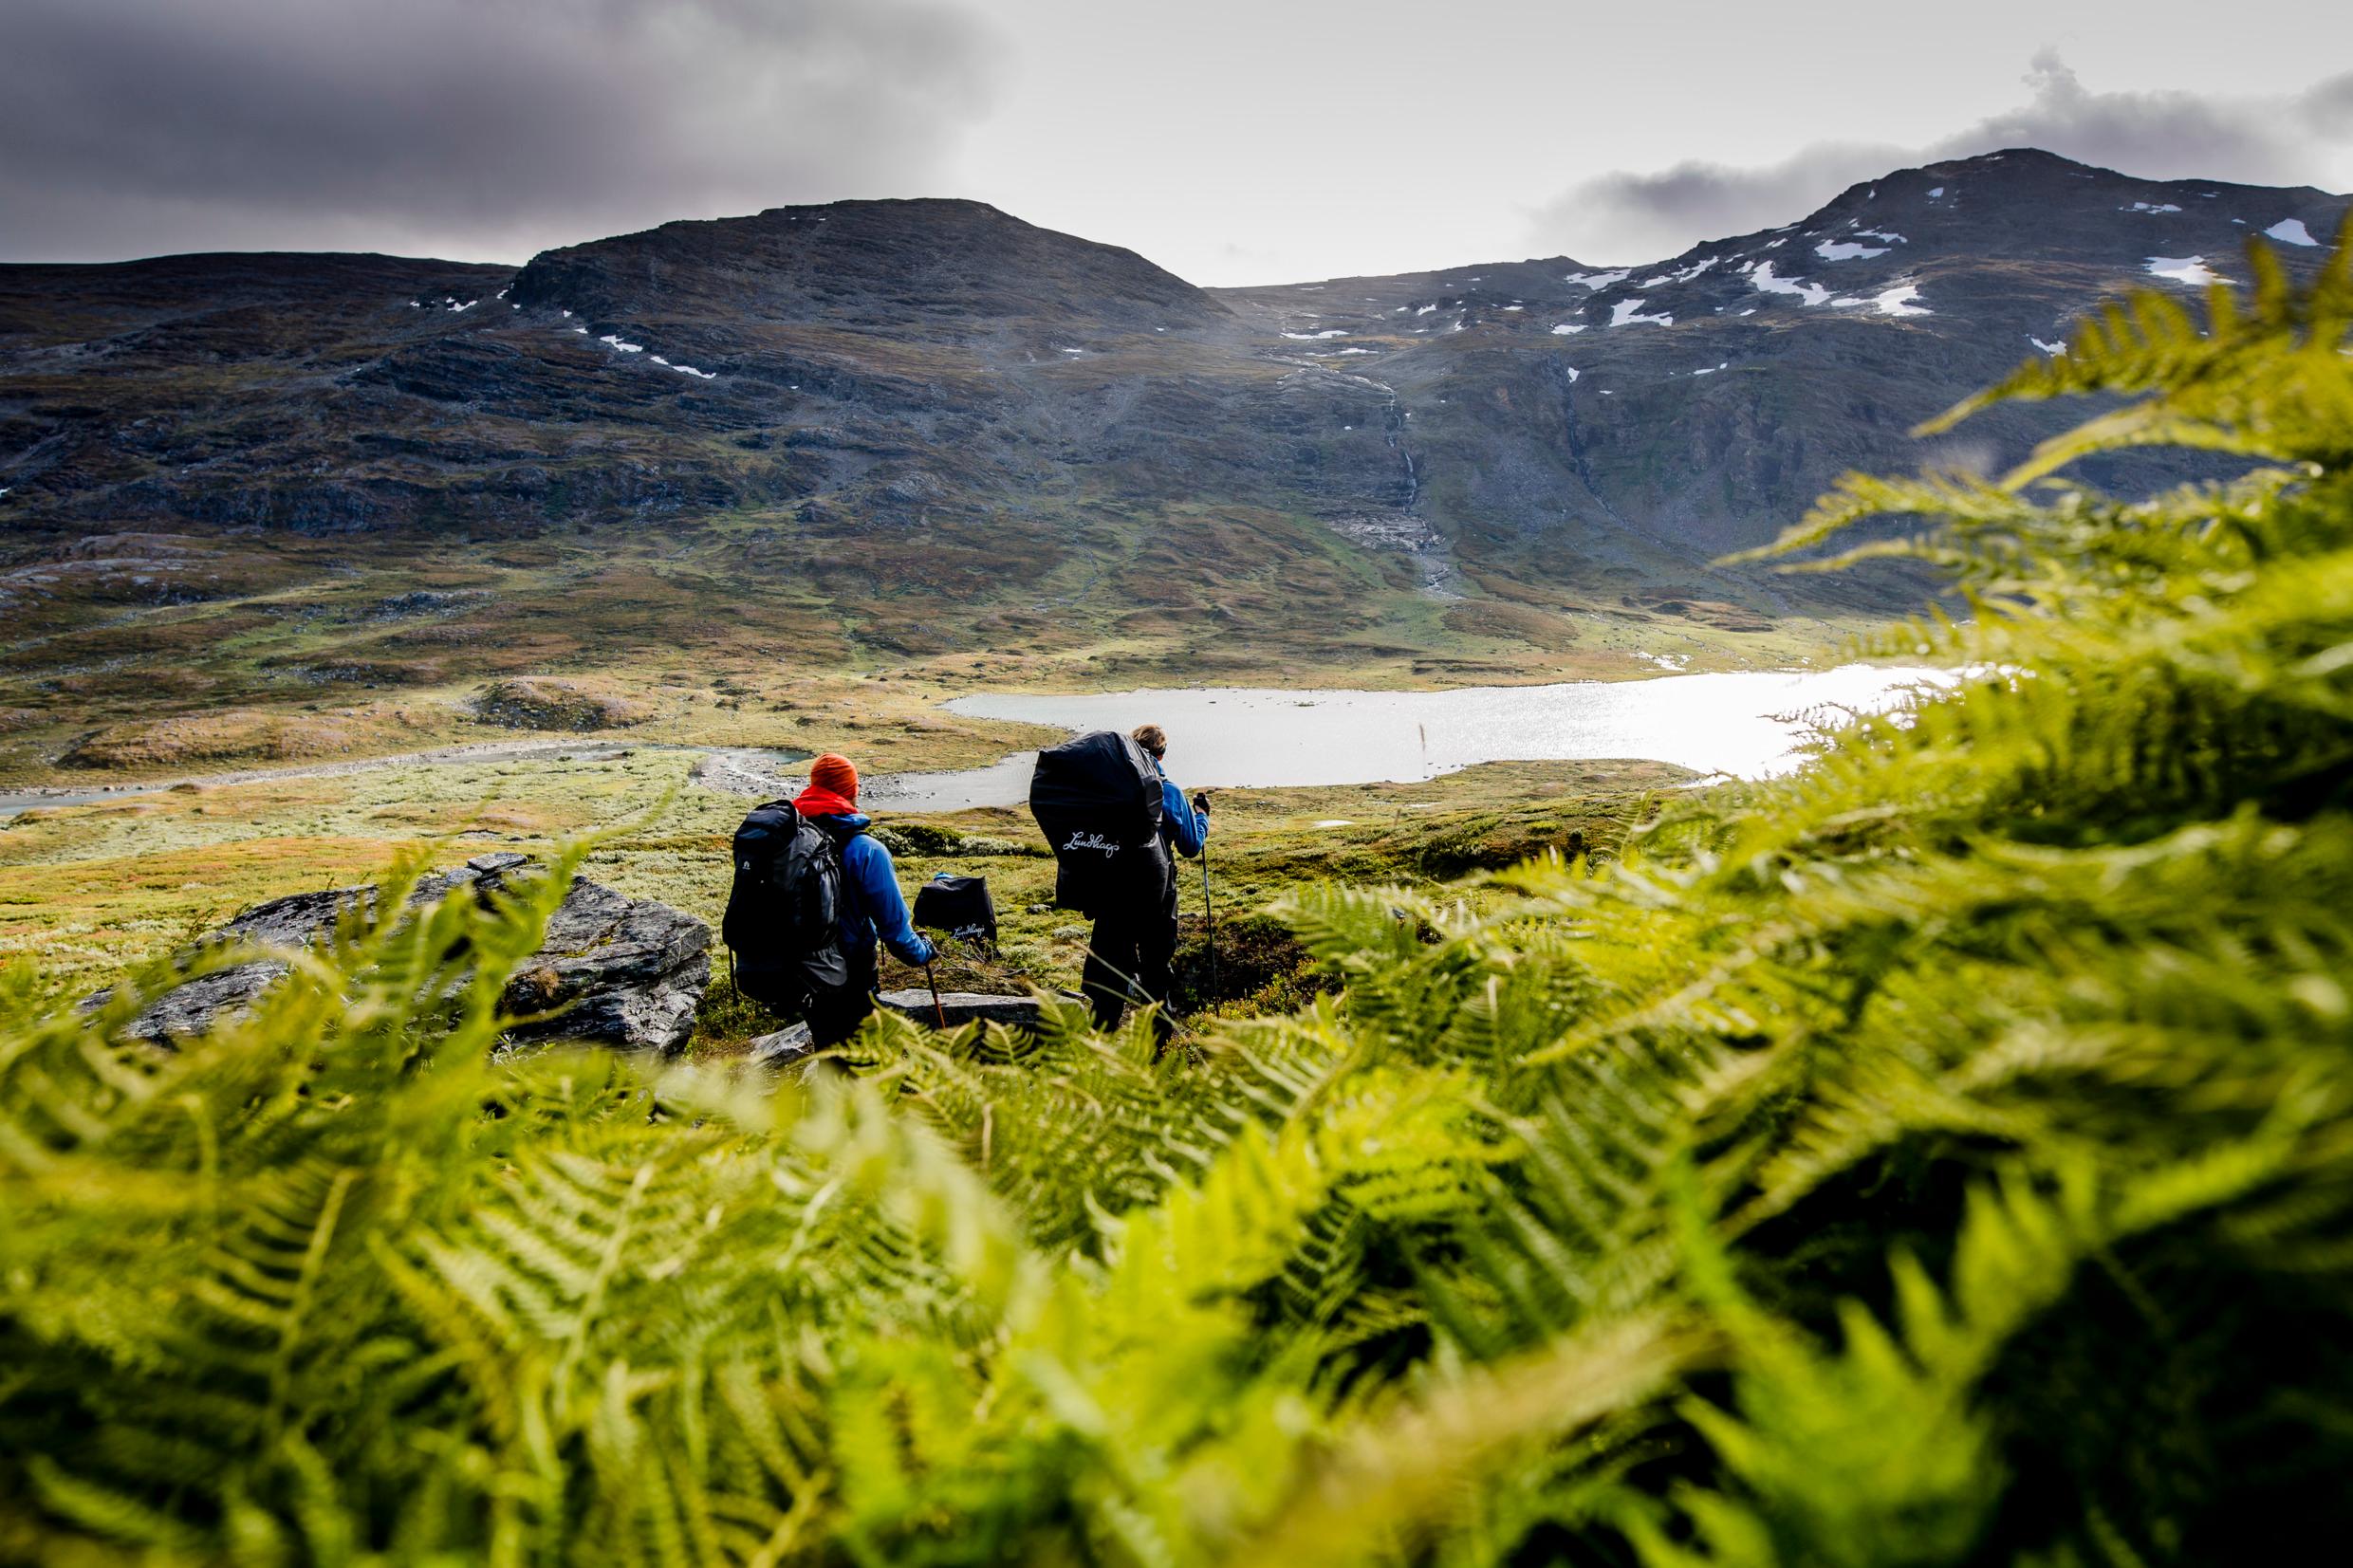 Two people hiking in the mountains, green fern in the foreground.